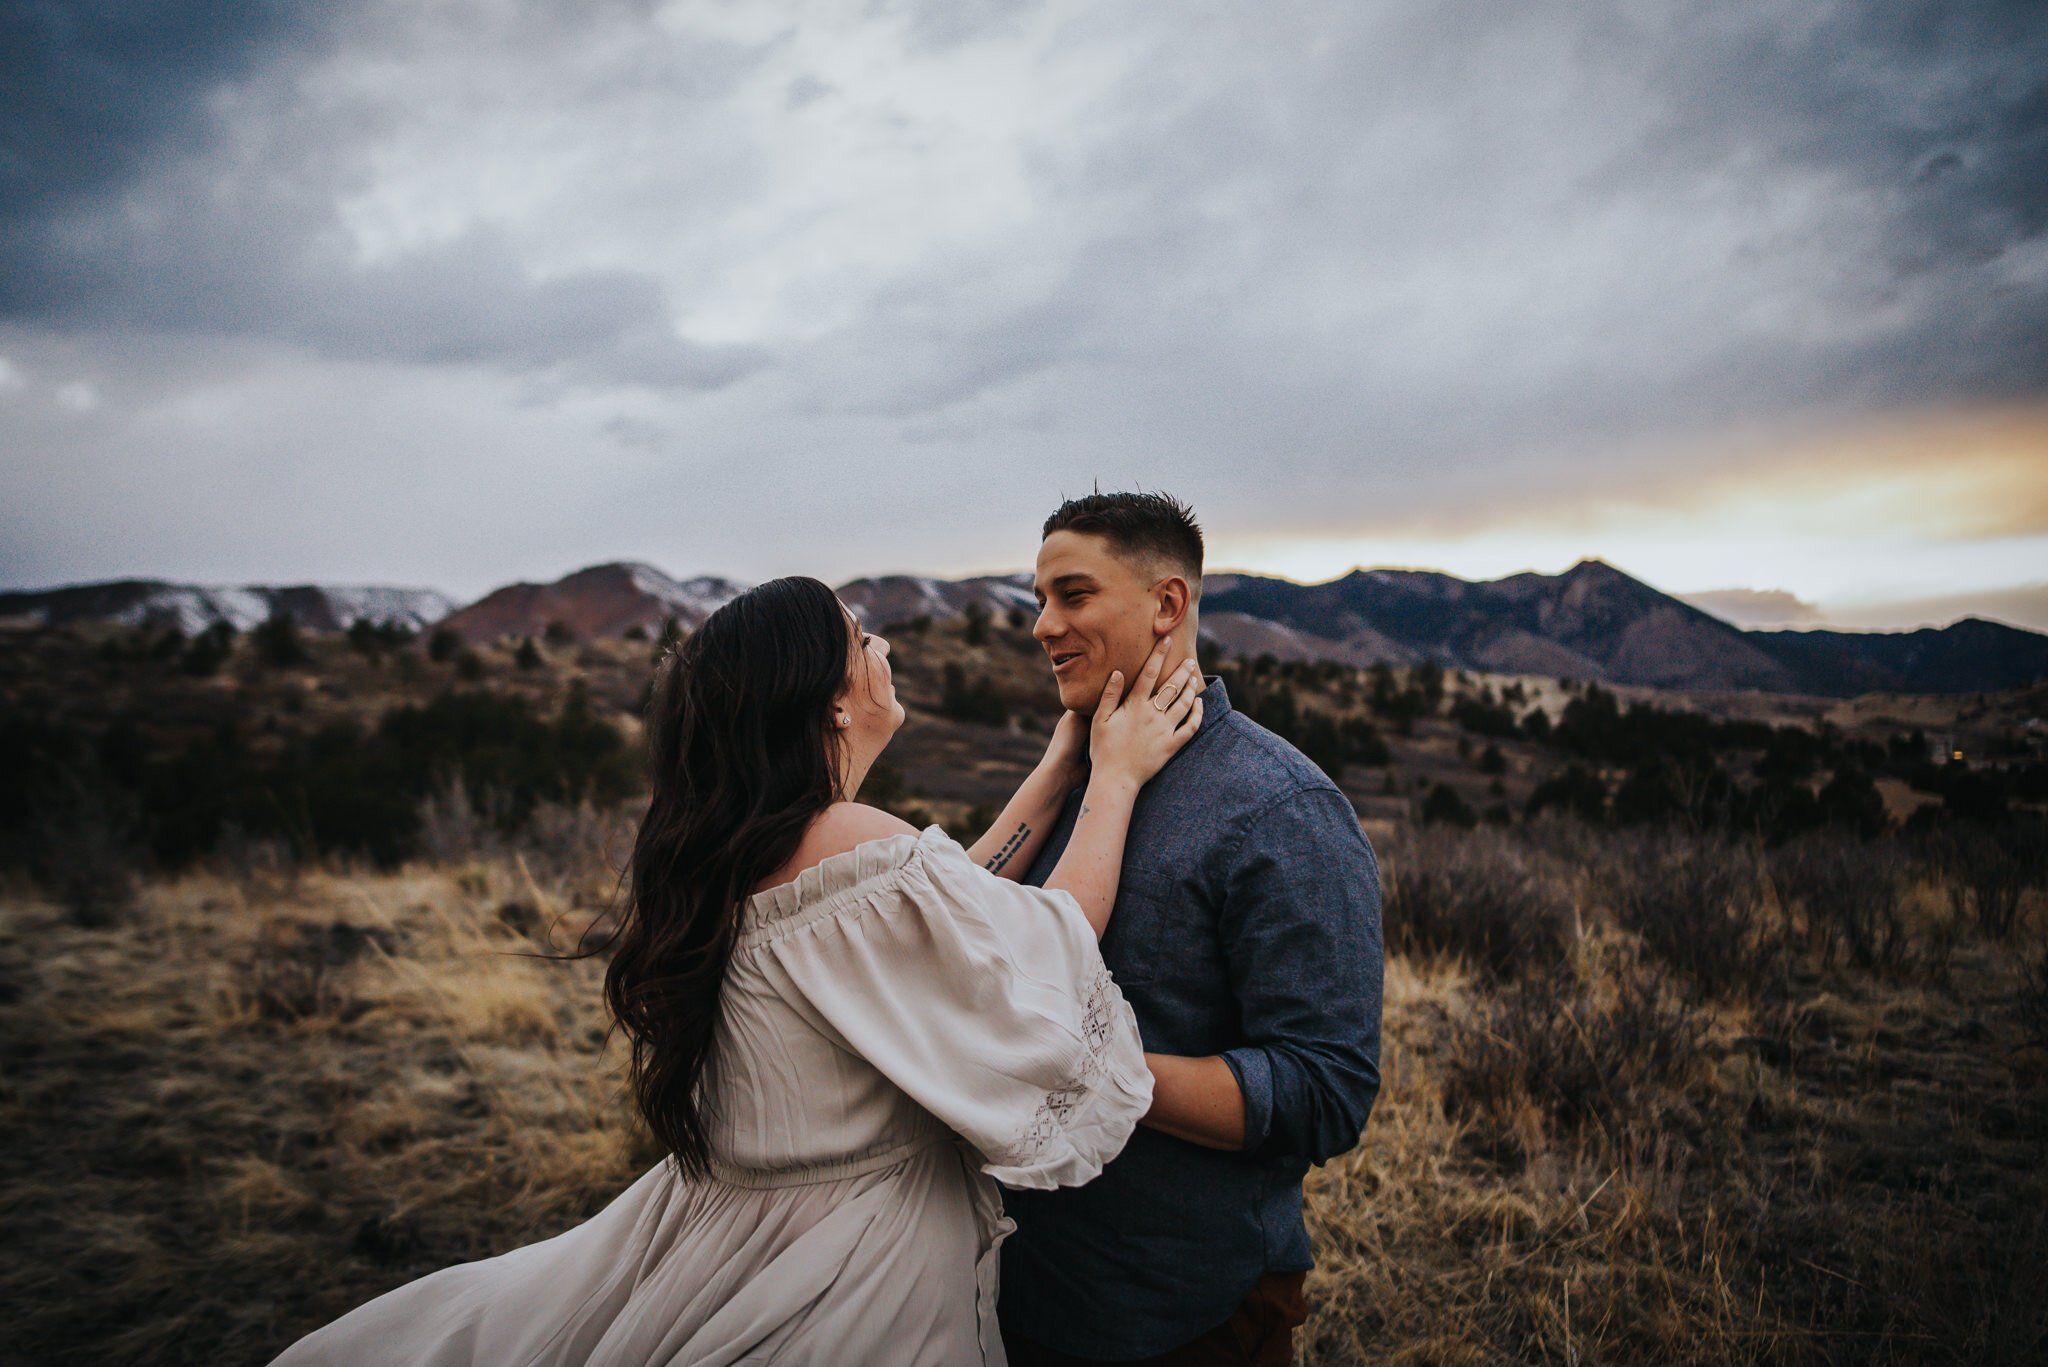 Miller+Family+Session+Mentorship+Colorado+Springs+Colorado+Sunset+Ute+Valley+Park+Mountains+Fields+Mom+Dad+Son+Daughter+Baby+Wild+Prairie+Photography-35-2020.jpeg